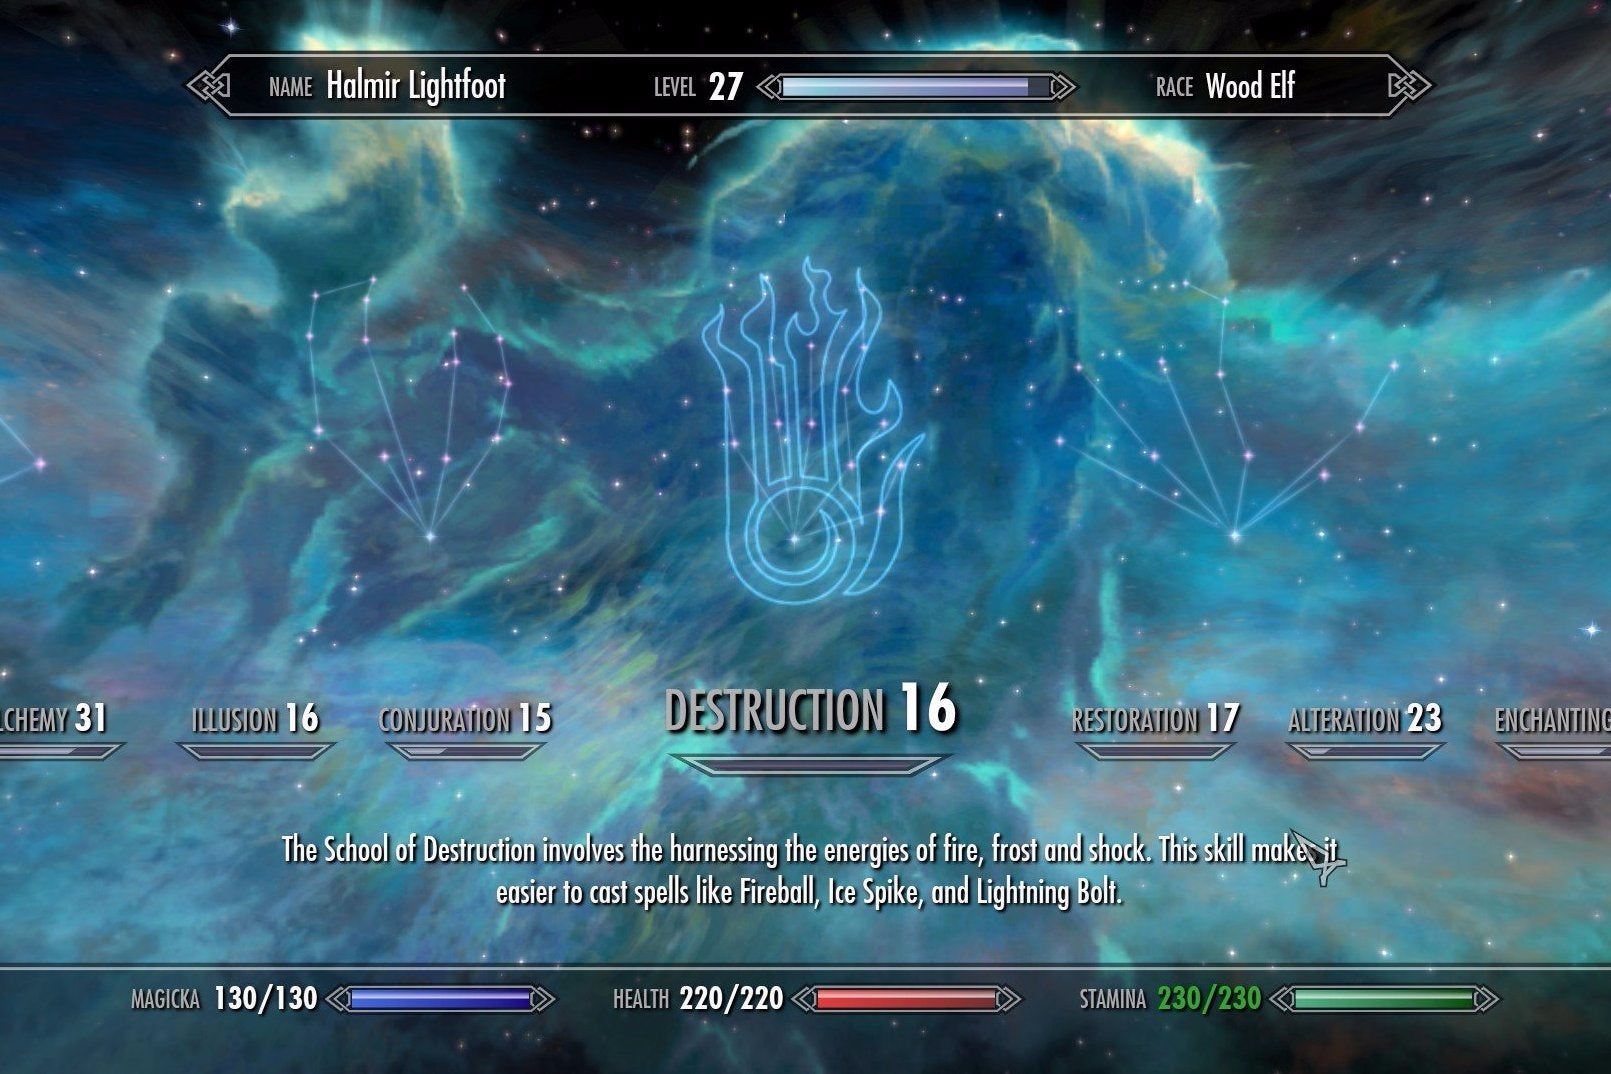 Image for Skyrim Mage Skills - how to max Destruction, Conjuration, Restoration, Illusion, and Alteration